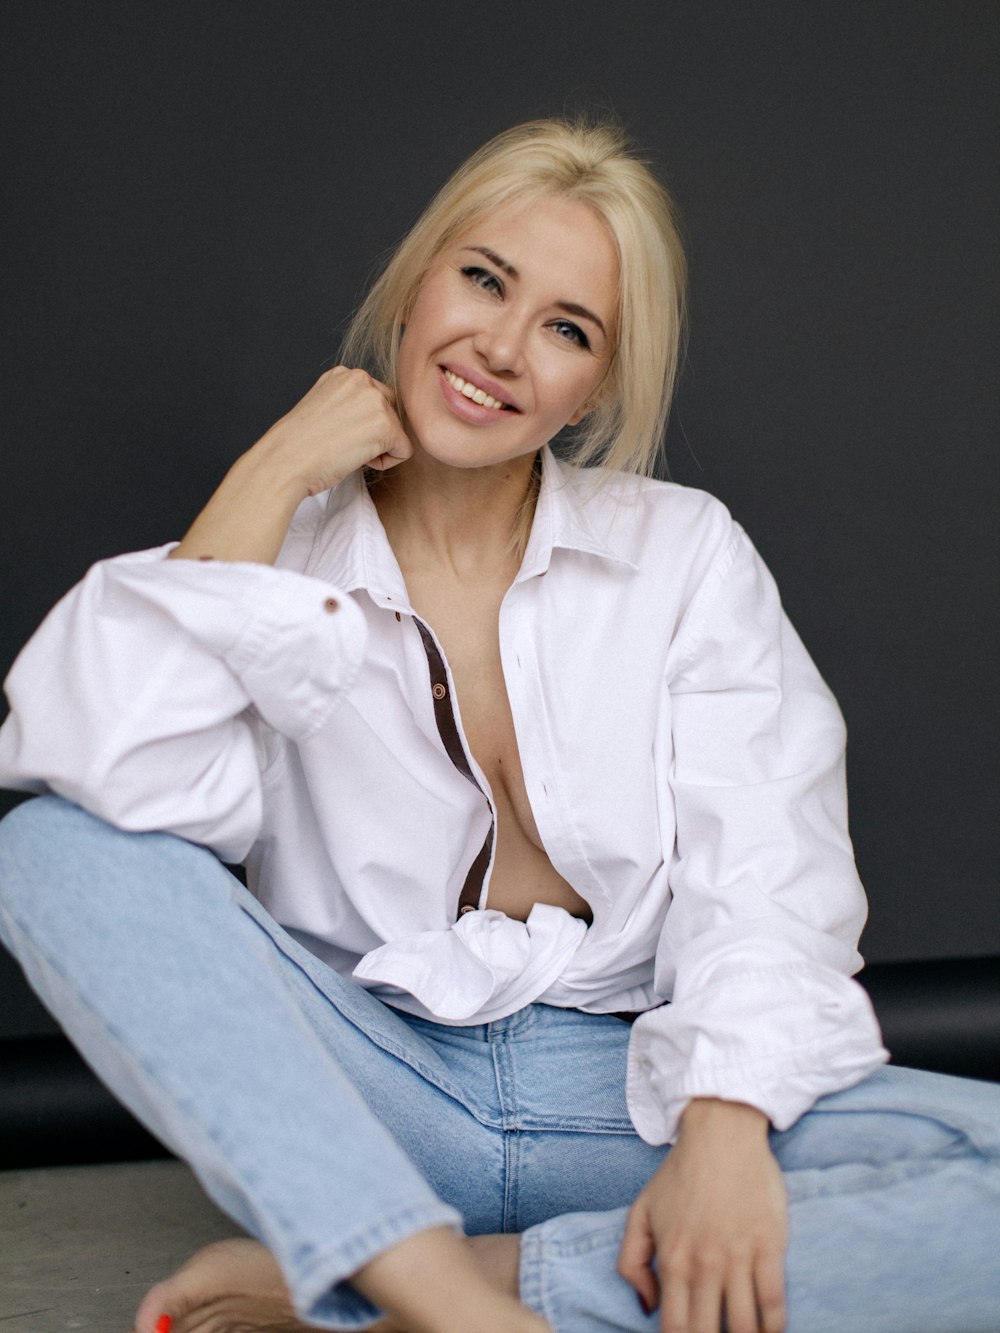 woman in white dress shirt and blue denim jeans sitting on black leather couch